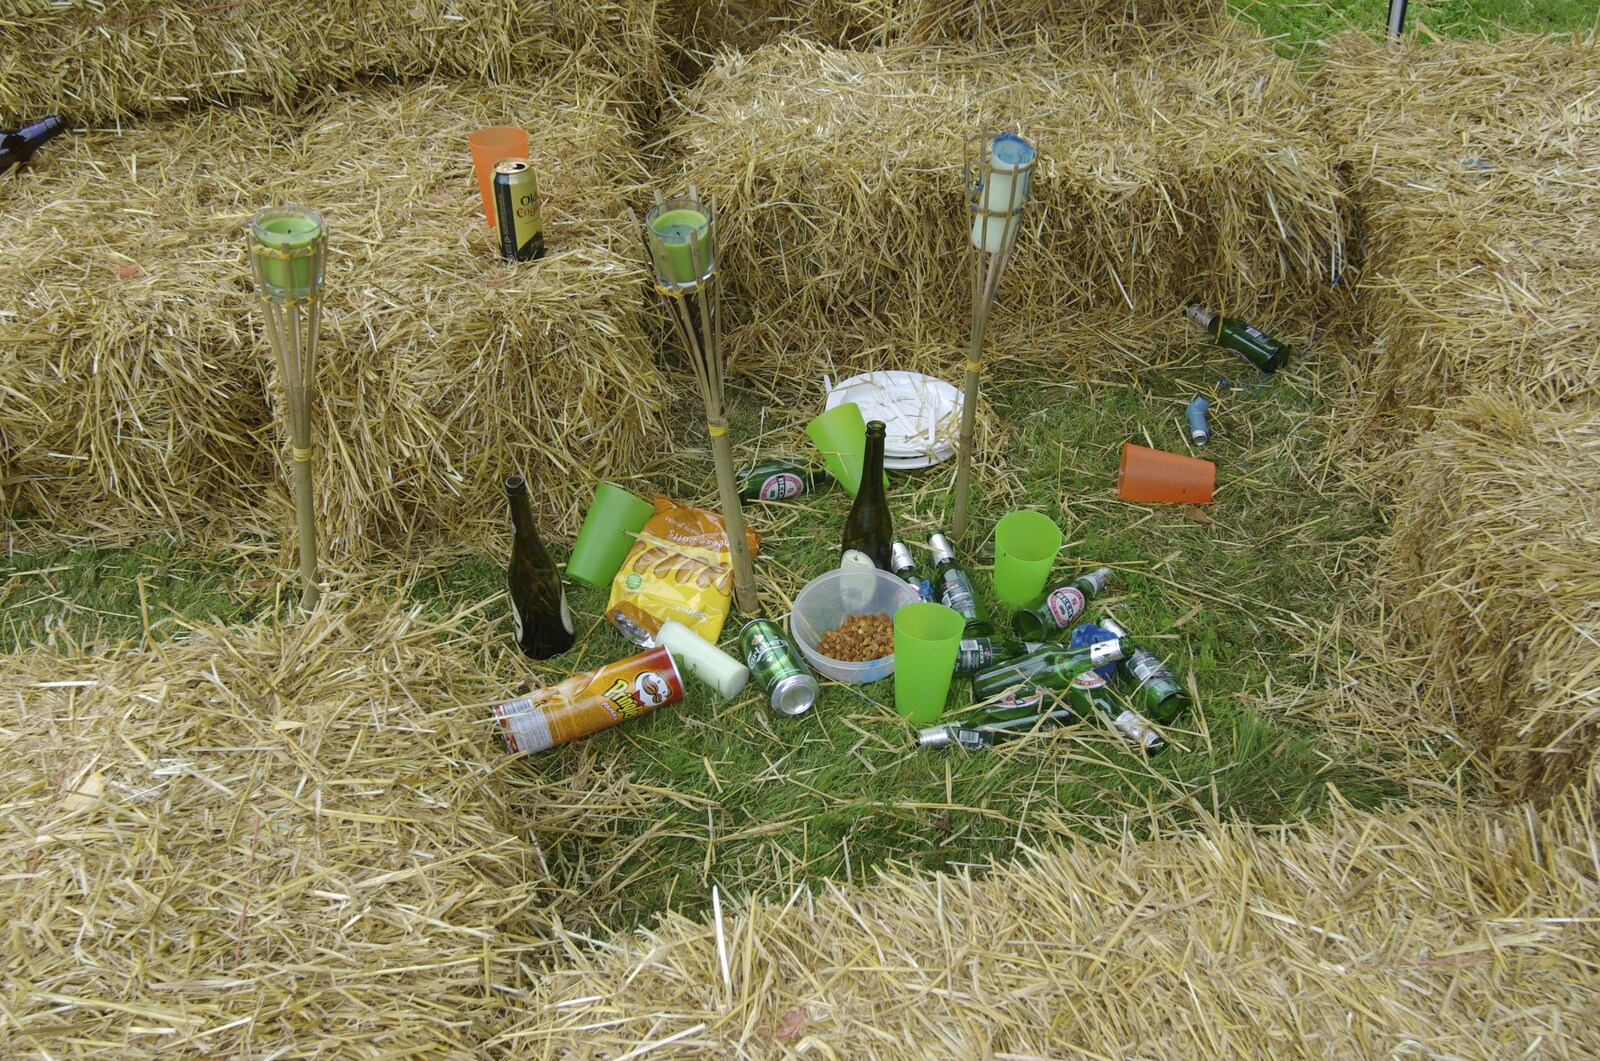 Bromestock Three, Brome, Suffolk - 18th August 2007: A pile of empty bottles